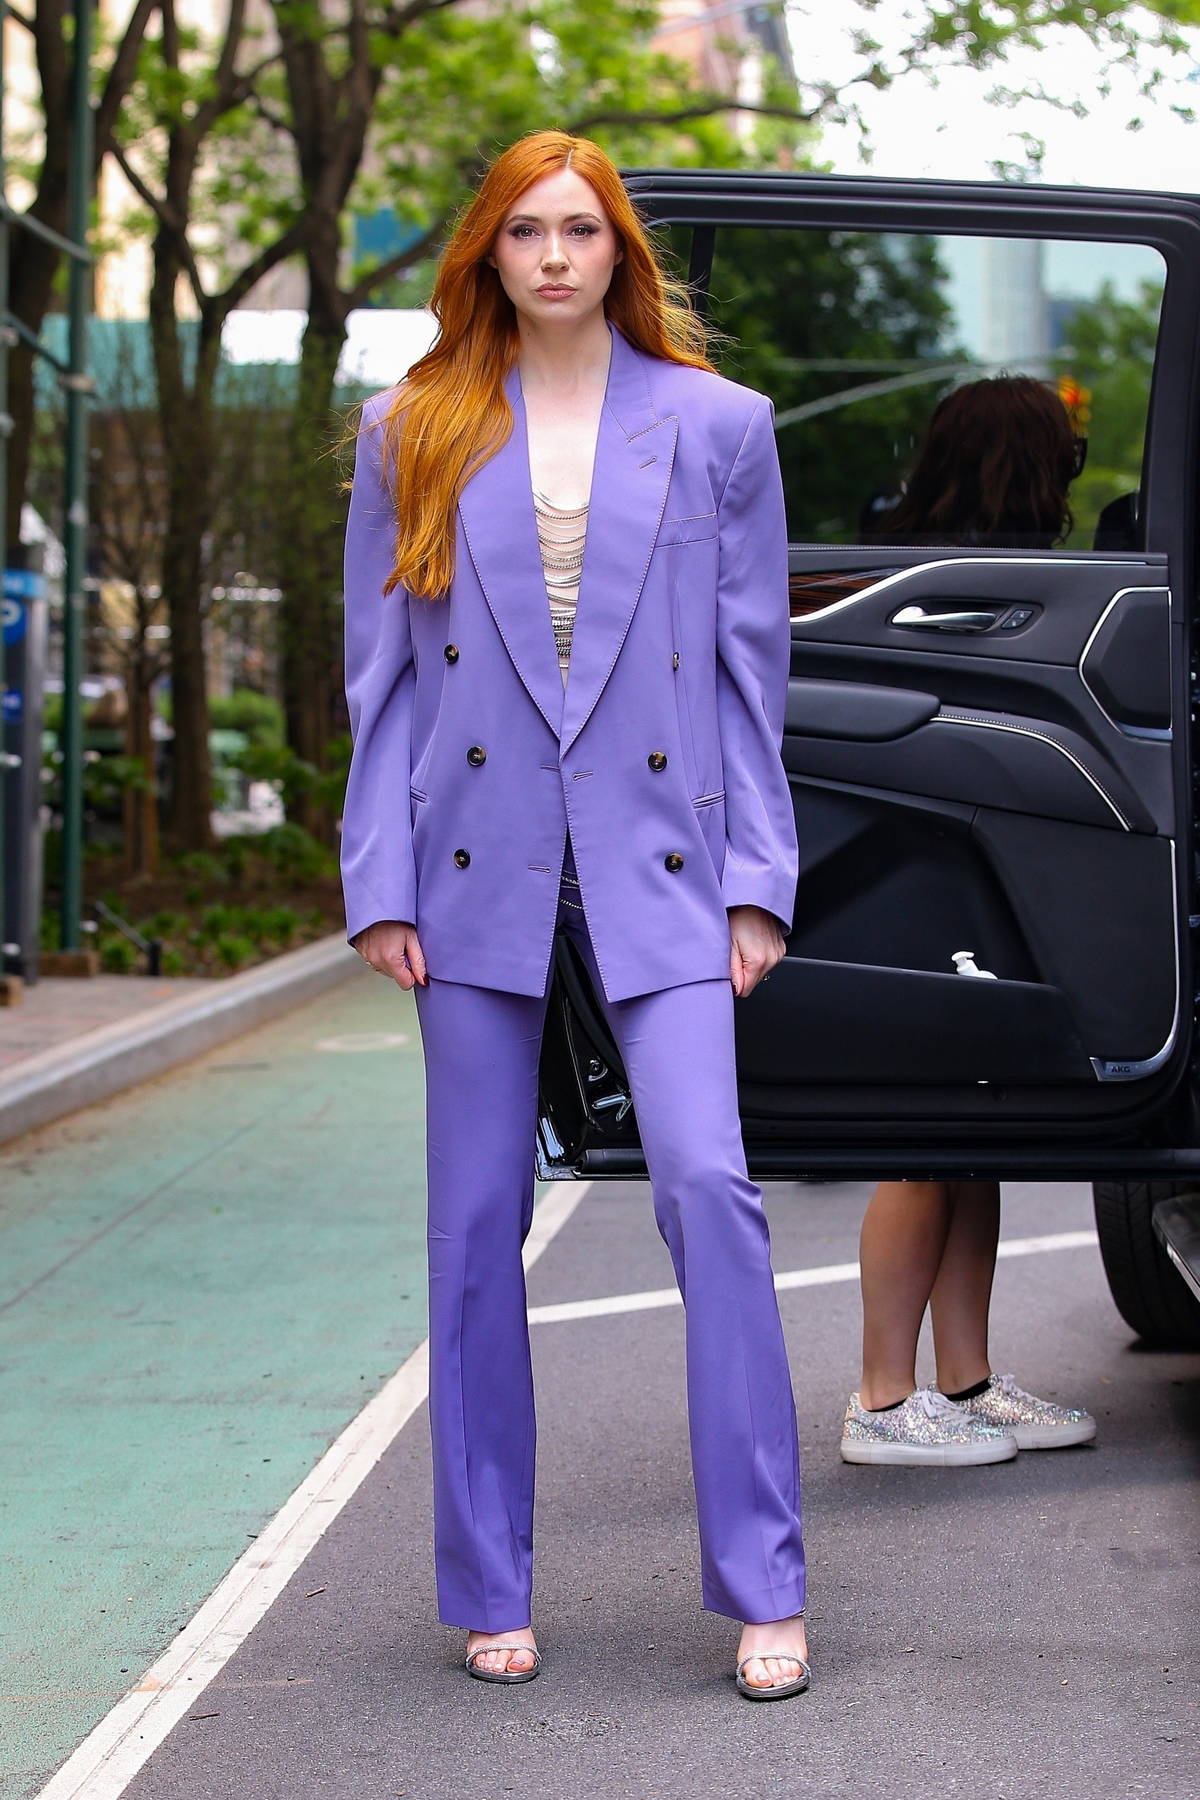 https://www.celebsfirst.com/wp-content/uploads/2023/05/Karen-Gillan-looks-striking-in-a-purple-pantsuit-while-visiting-Watch-What-Happens-Live-With-Andy-Cohen-in-New-York-City-090523_1.jpg